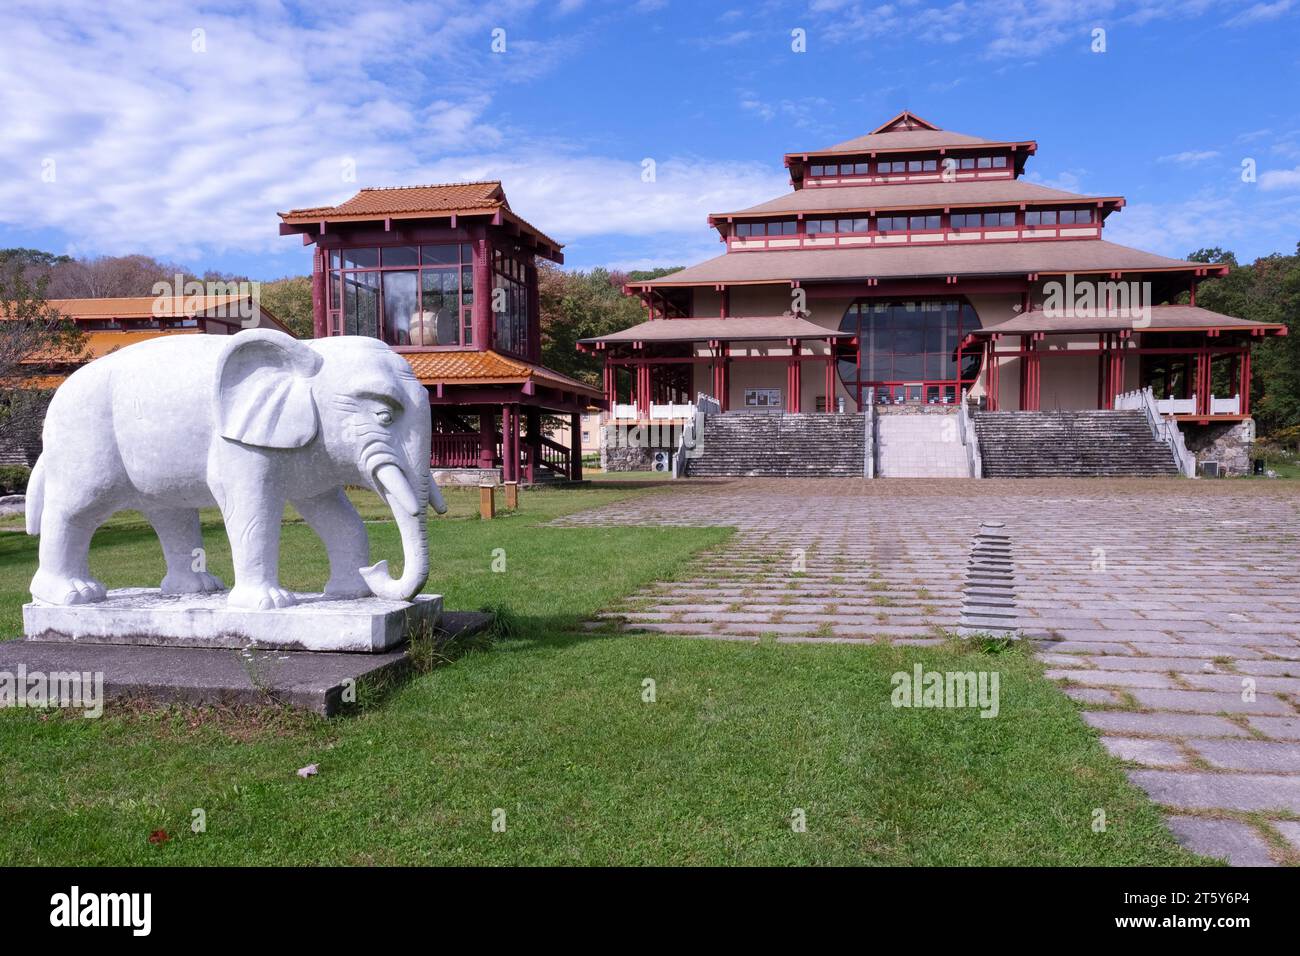 The exterior of the Chuang Yen Buddhist Monastery in Carmel, Putnam County, NY. It's home to the largest Buddha statue in the western hemisphere. Stock Photo